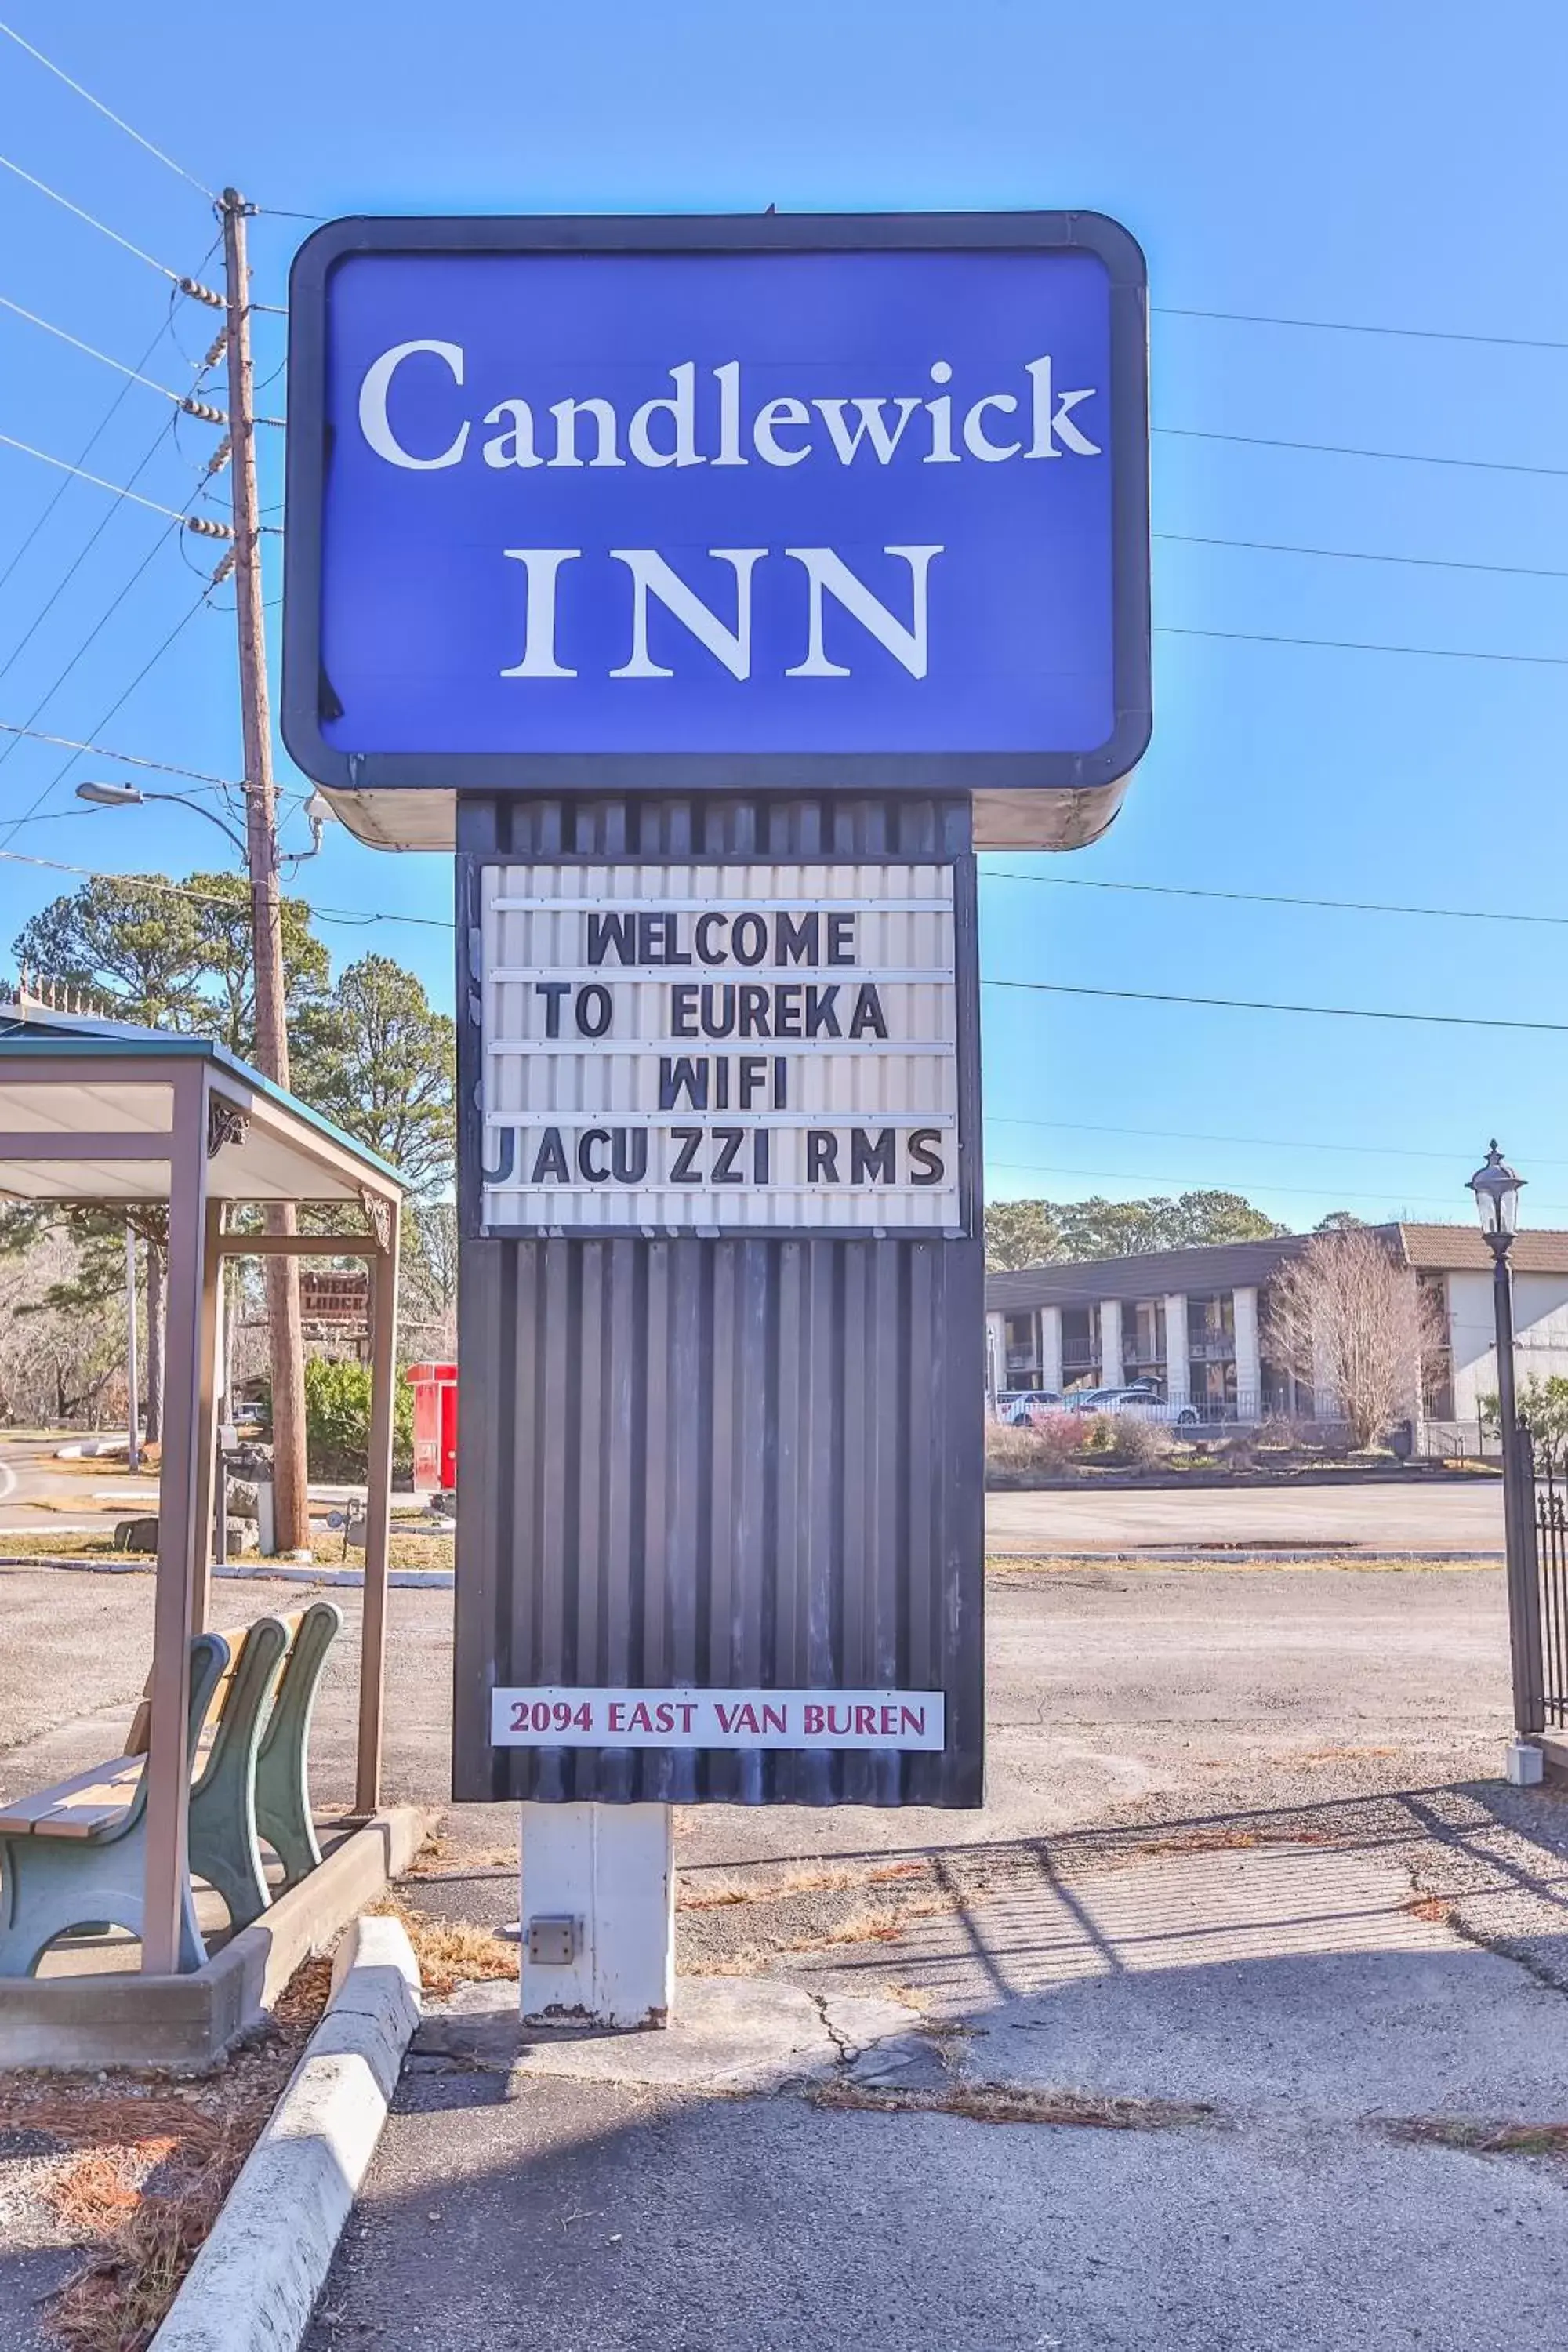 Property logo or sign in Candlewick Inn and Suites